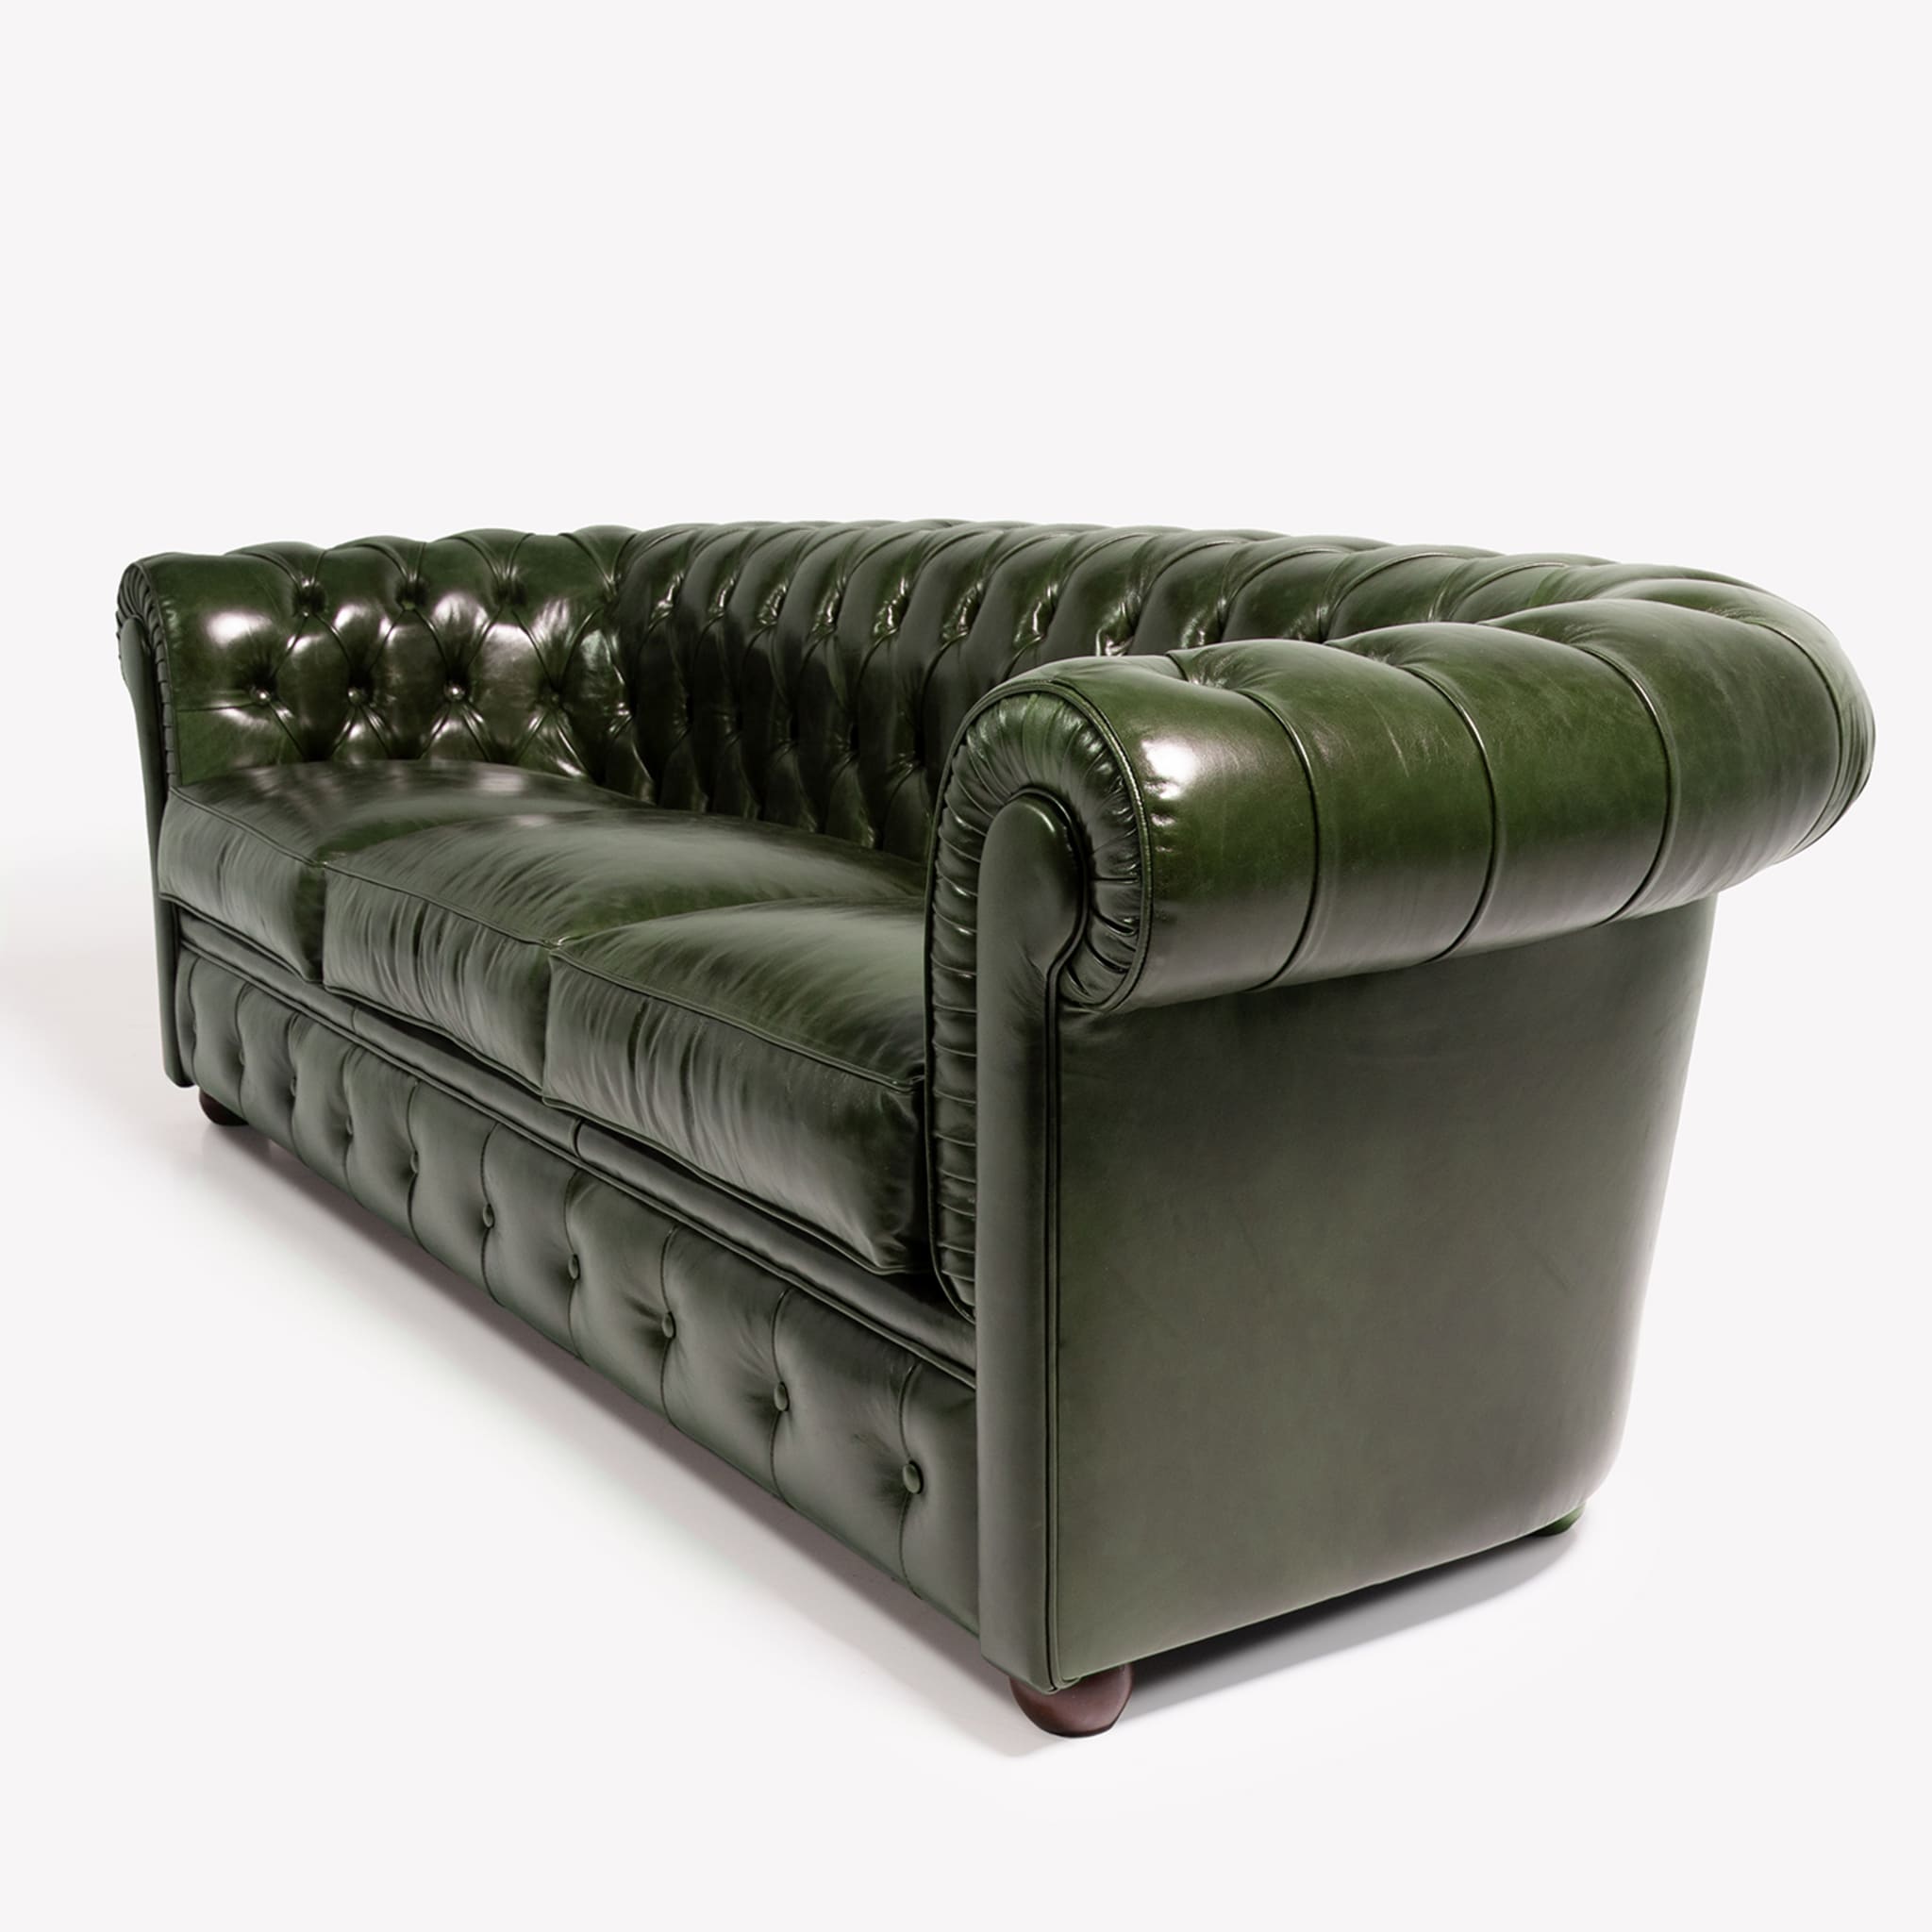 Chesterfield Green Leather 3-Seater Sofa - Alternative view 1